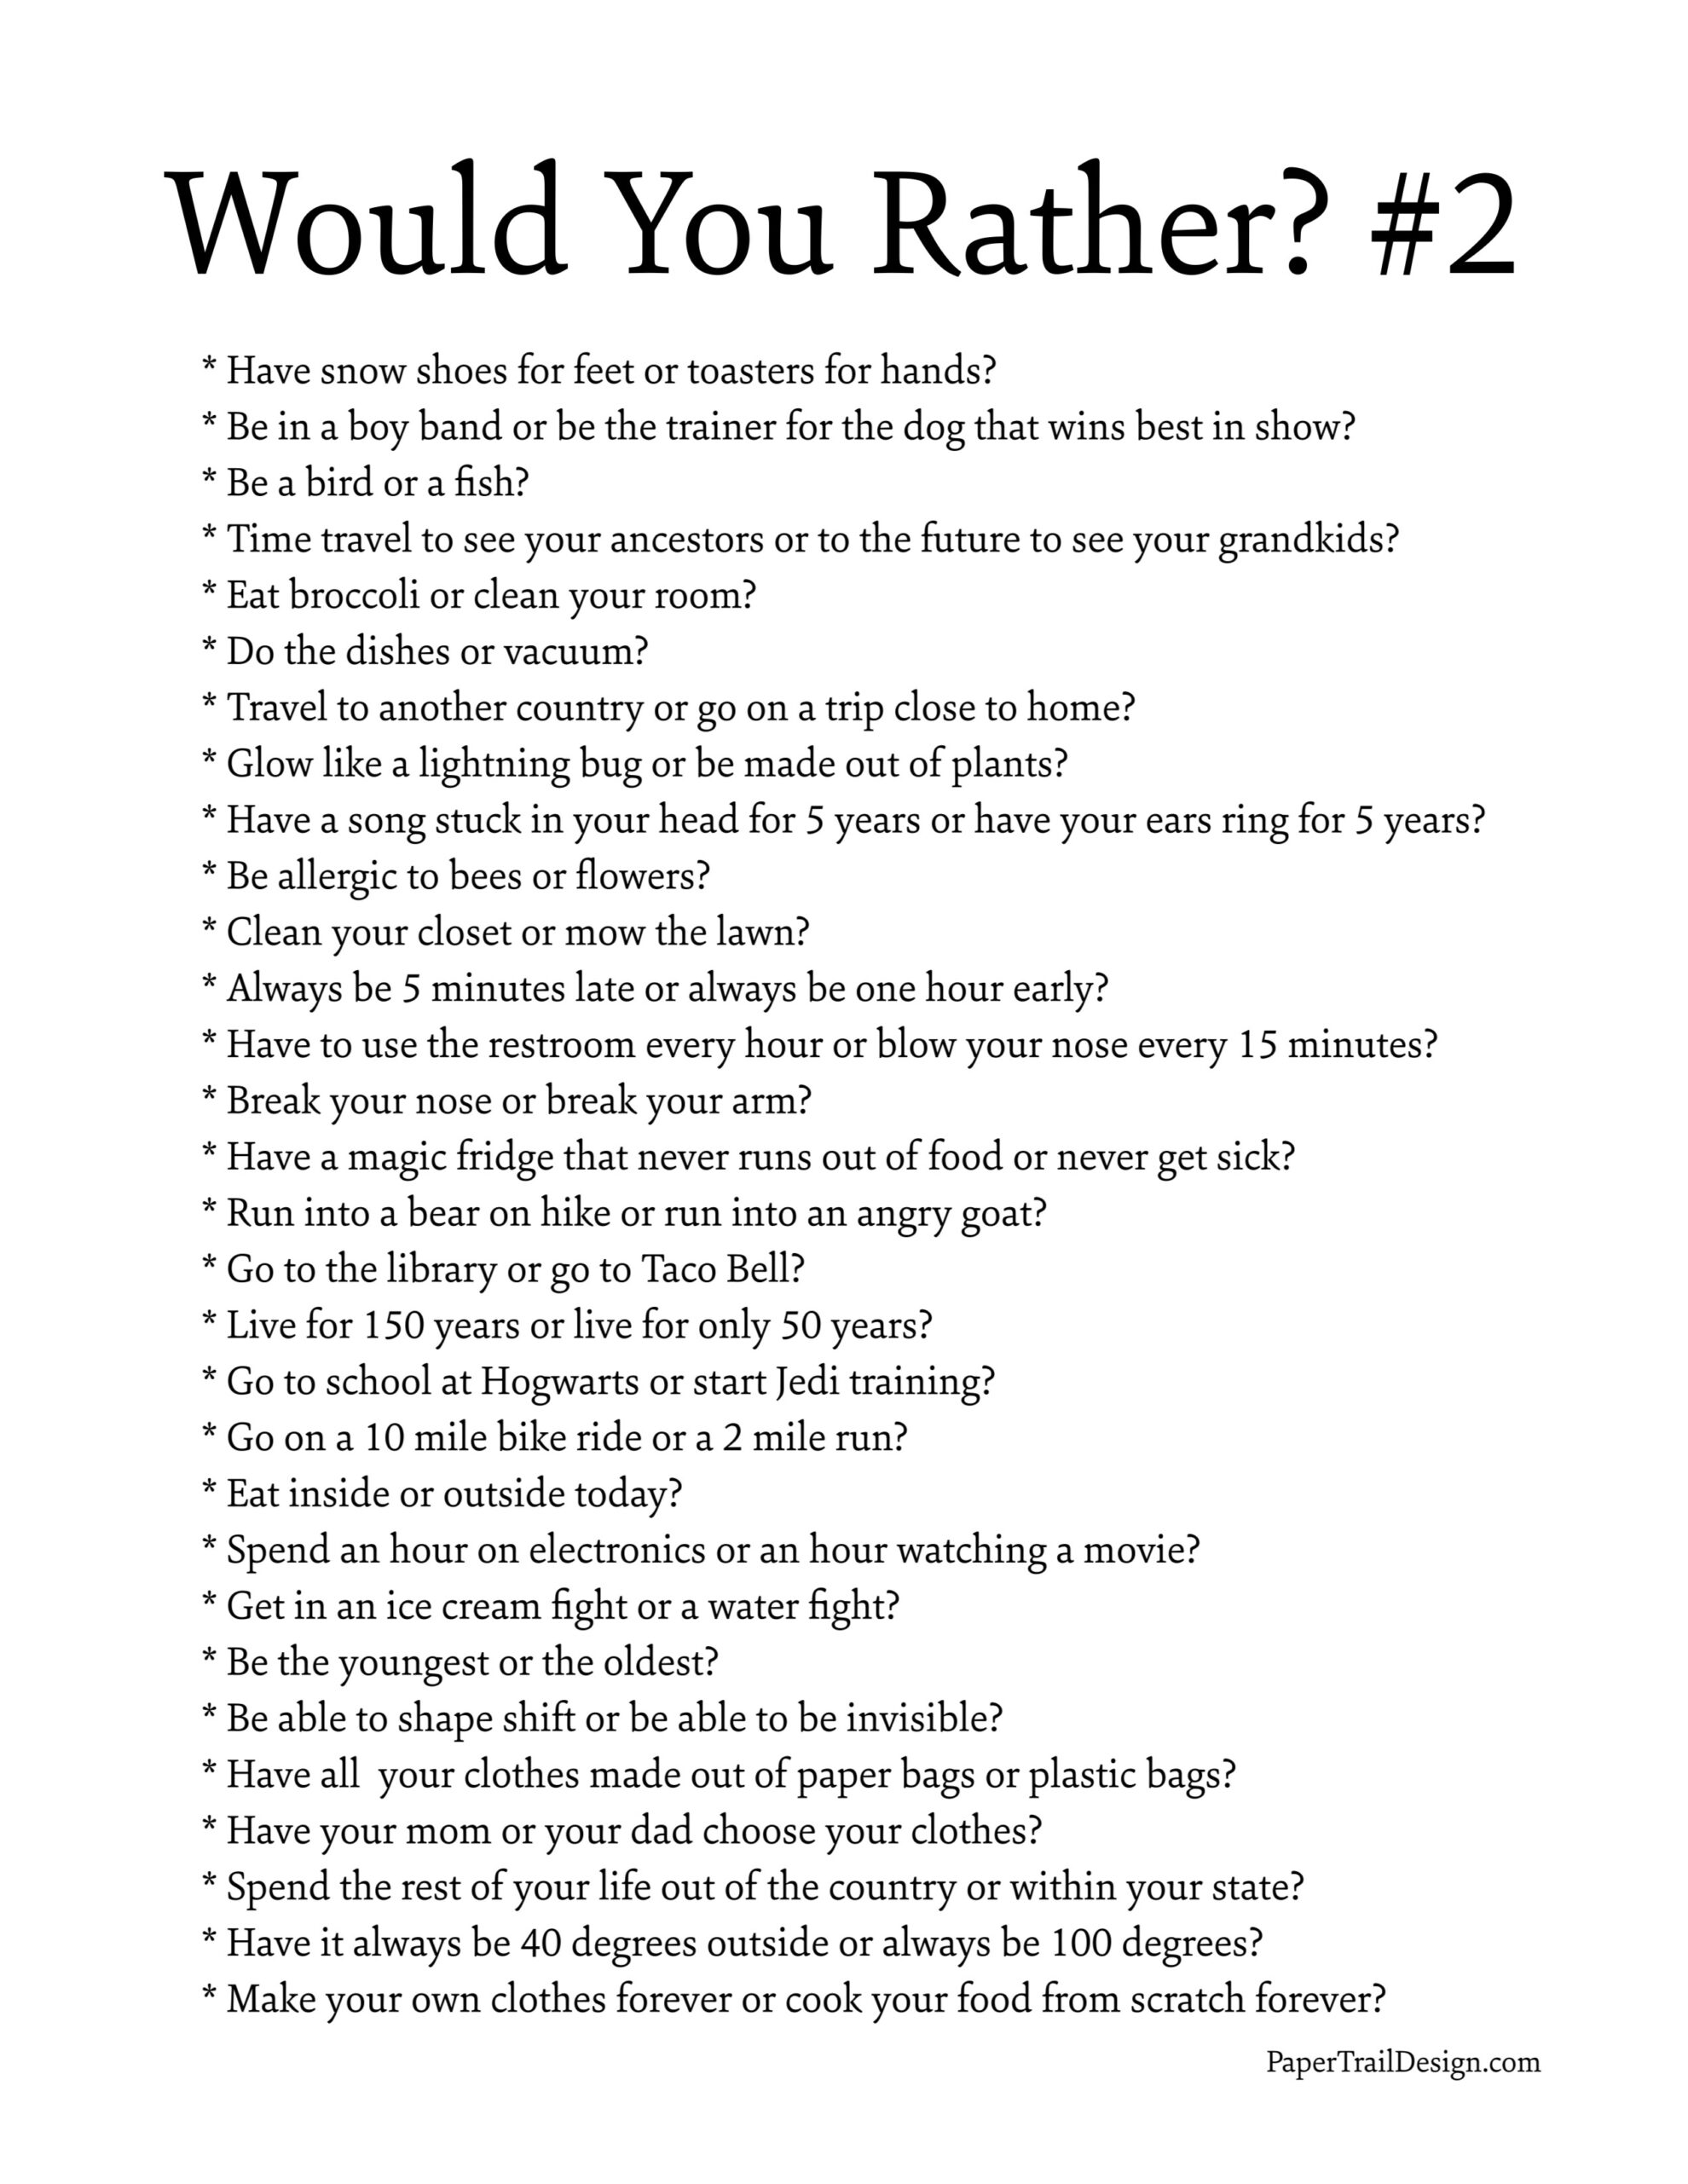 450 Would You Rather Questions - The best list out there